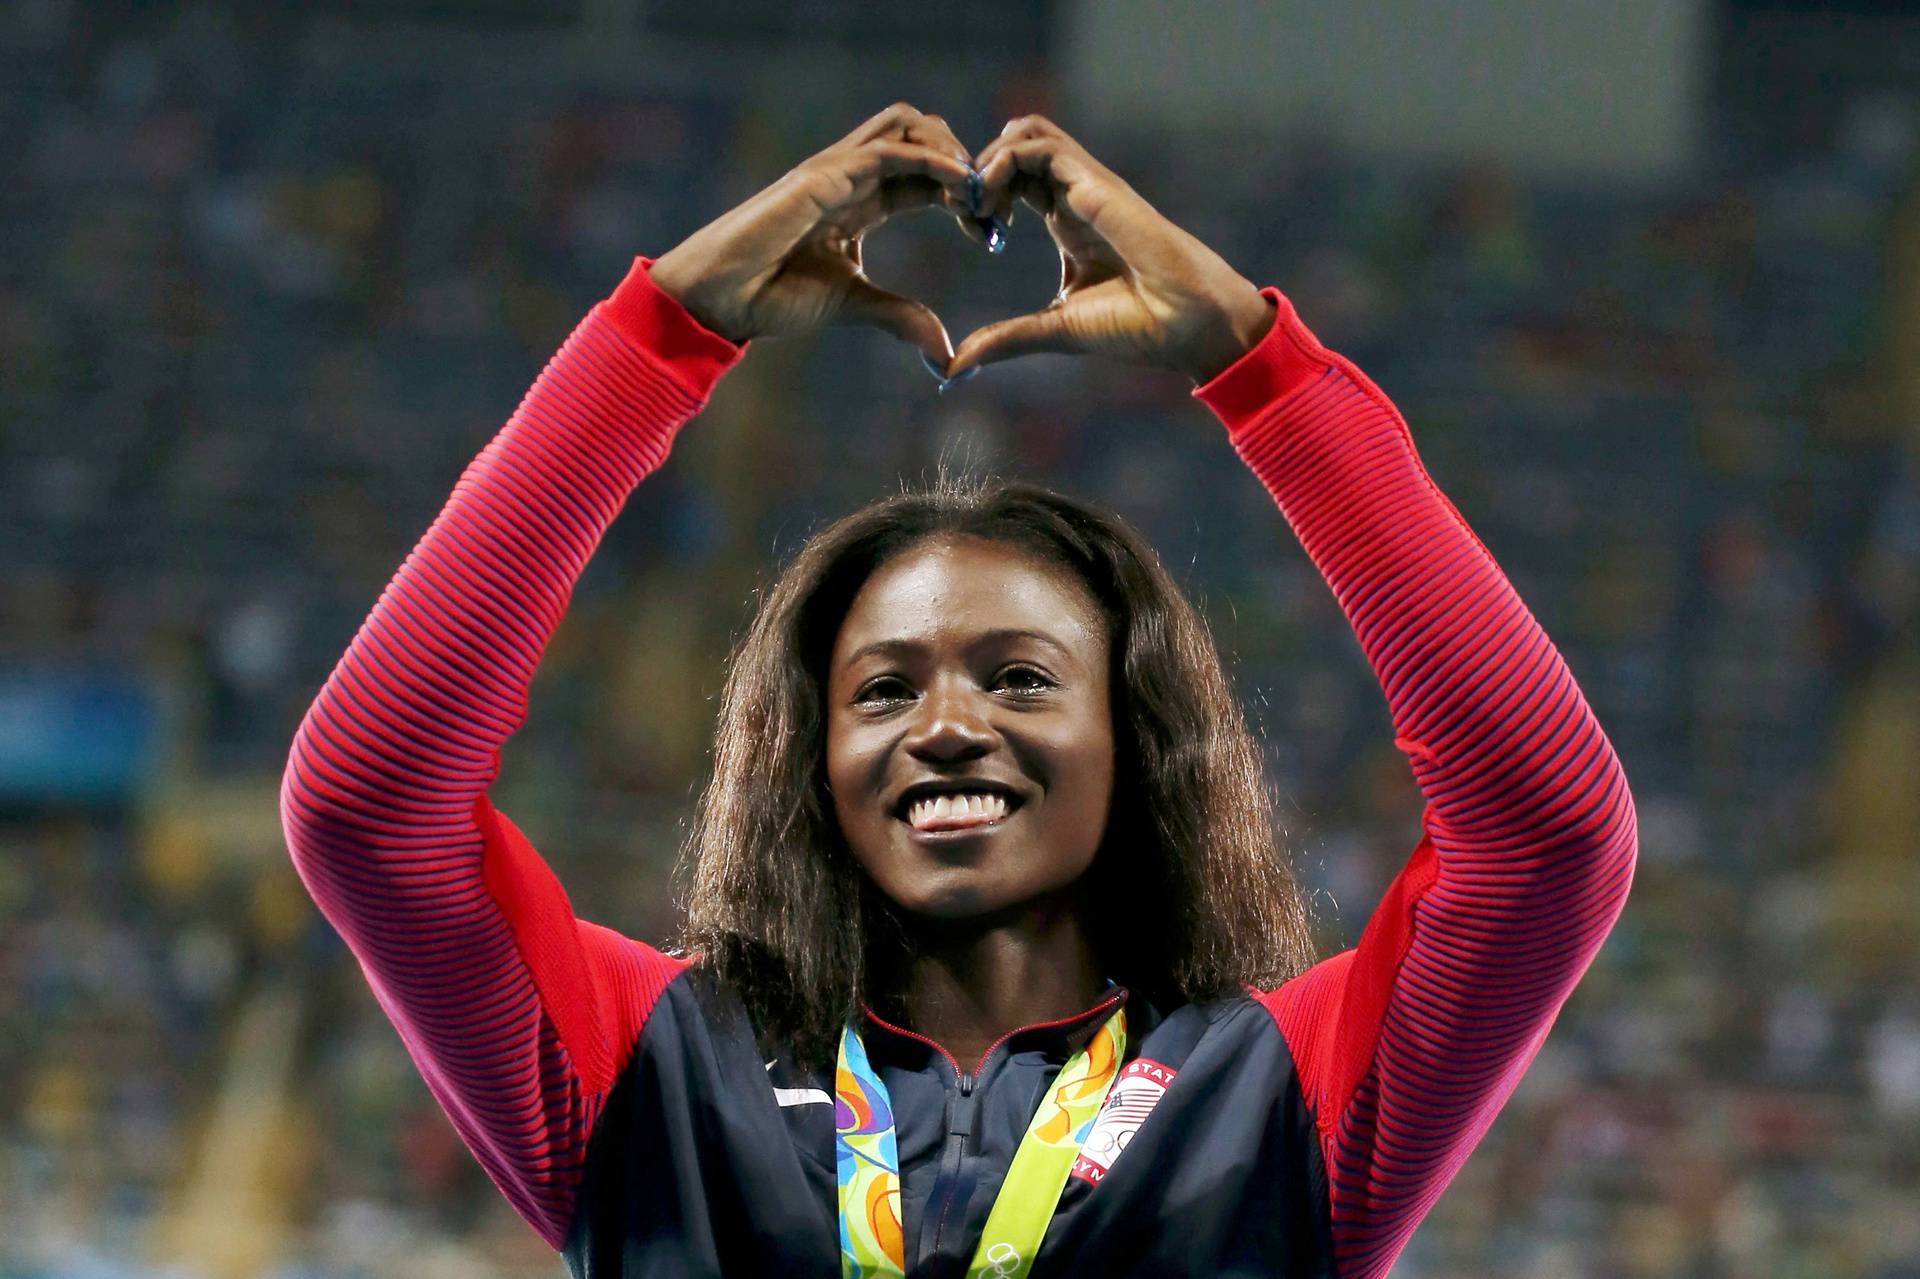 FILE PHOTO: Bronze medalist Tori Bowie of USA reacts at the 2016 Rio Olympics